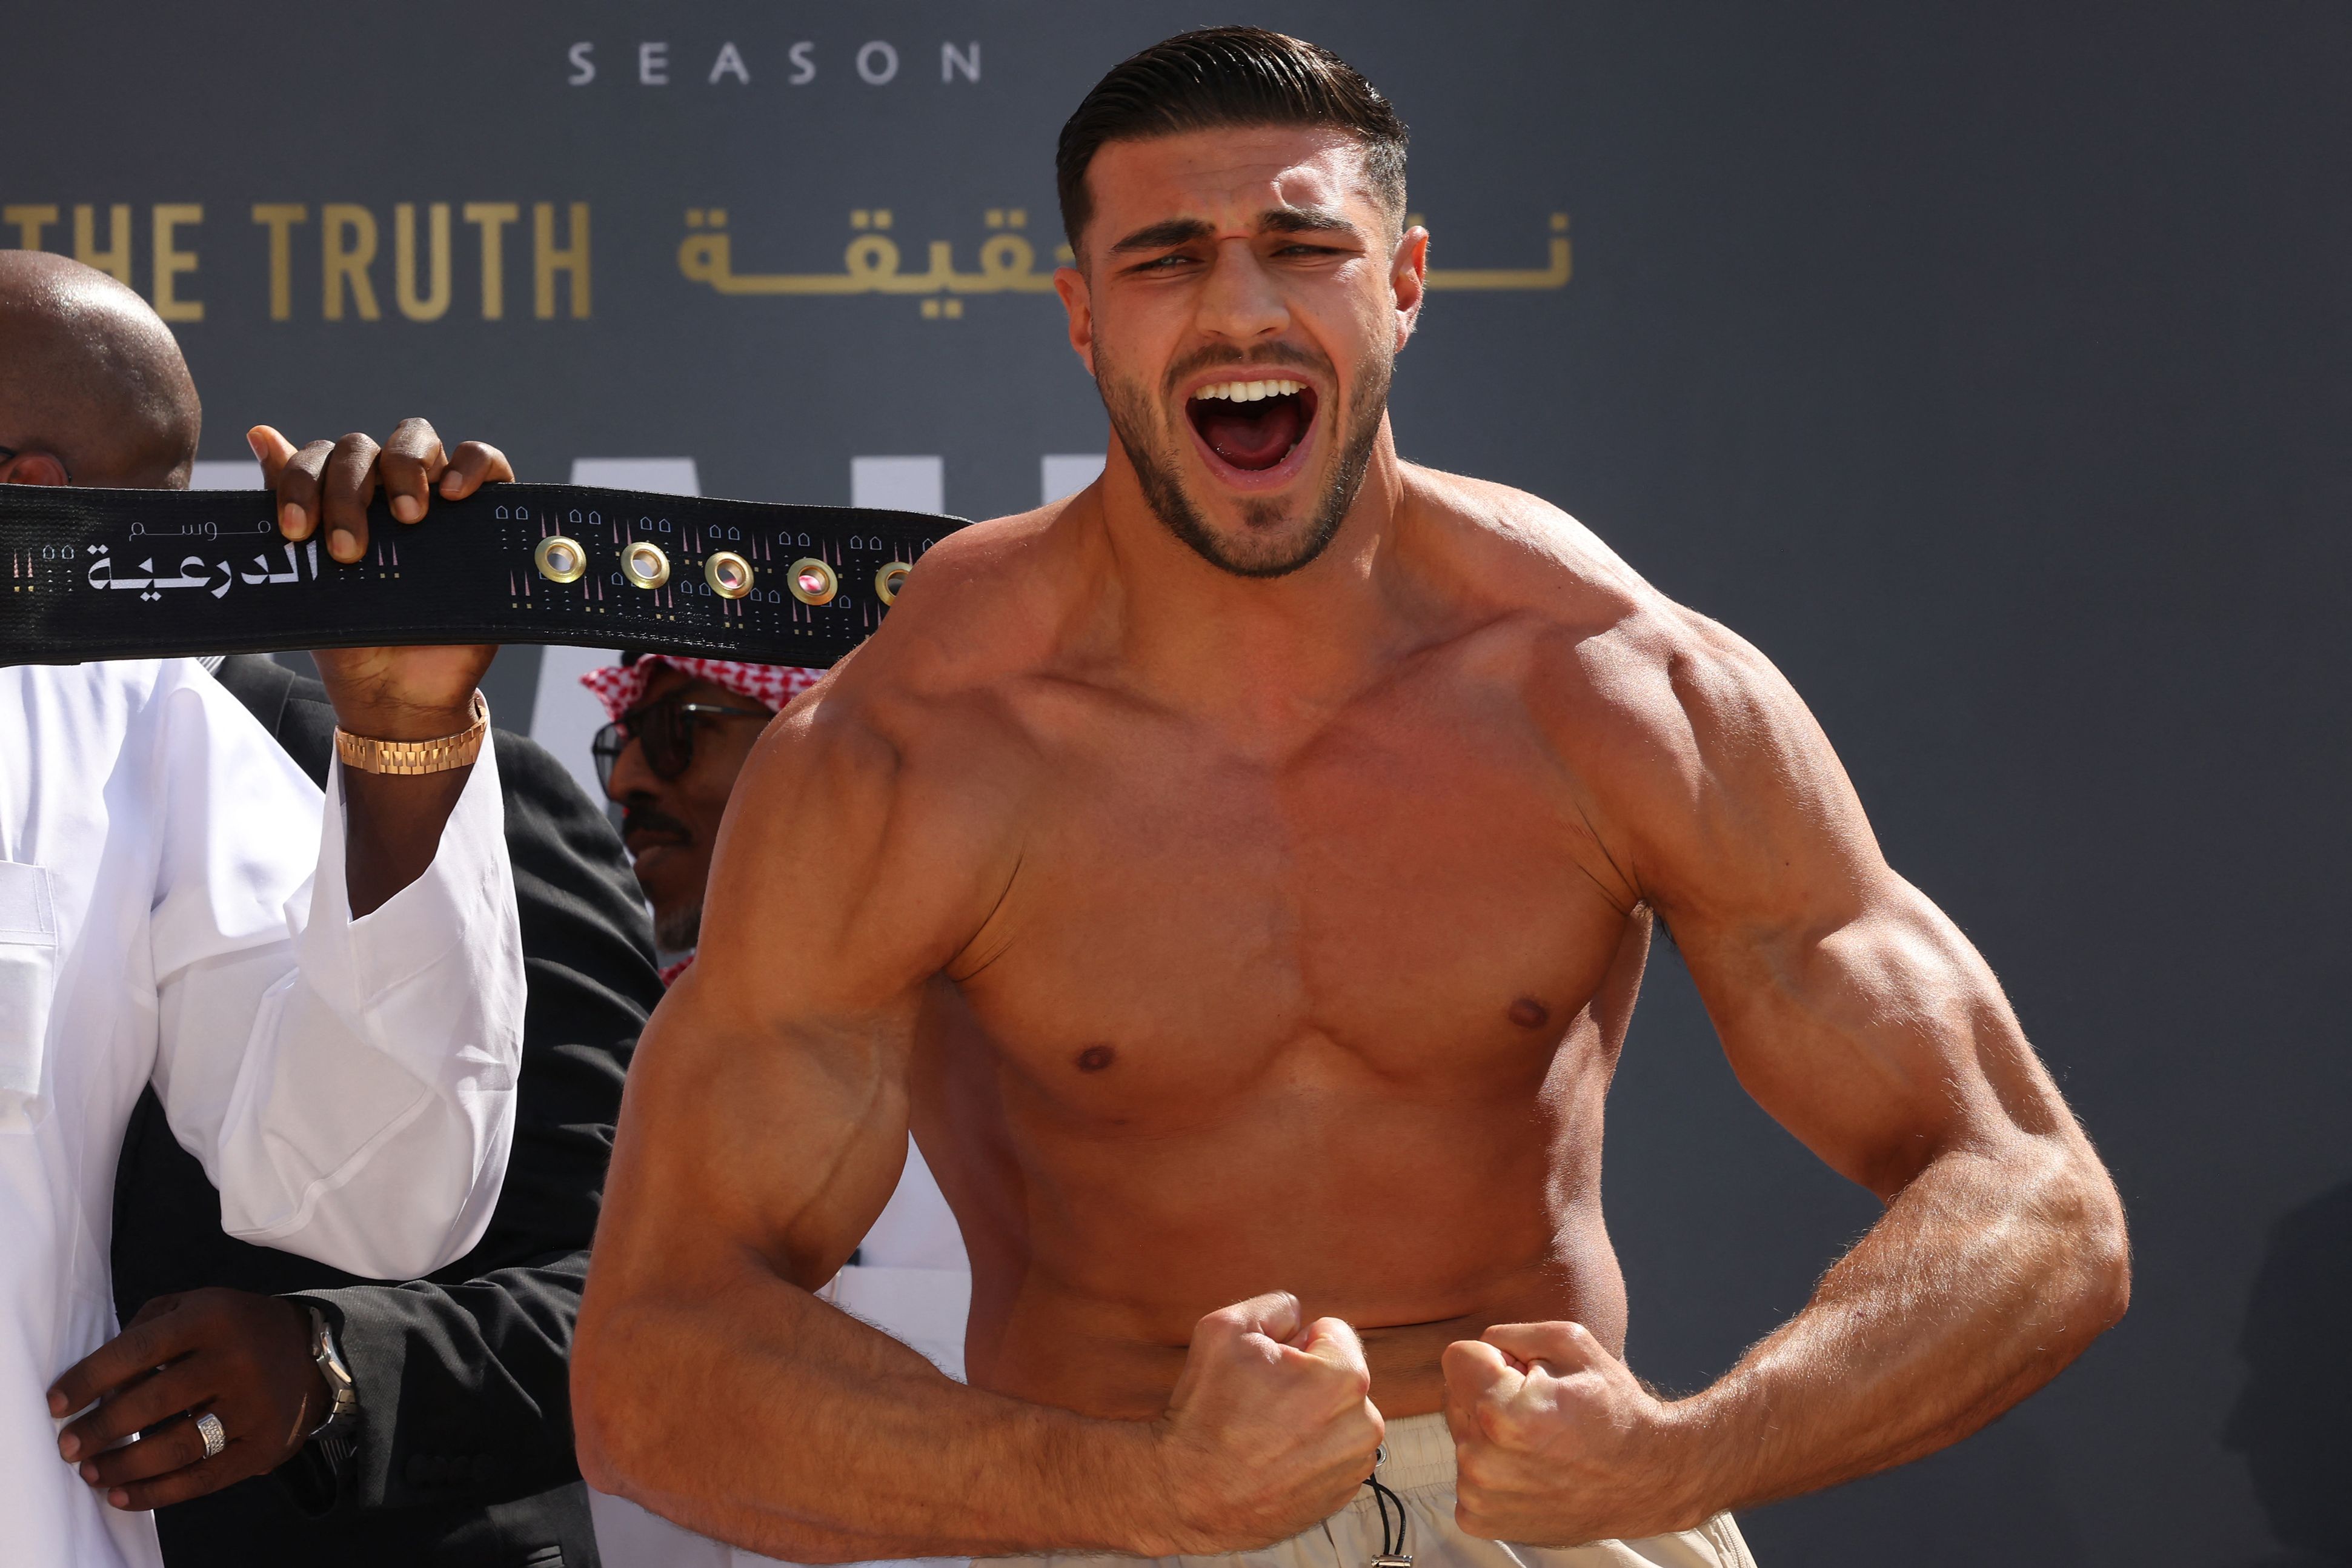 Tommy Fury and KSI have agreed upon a fight weight